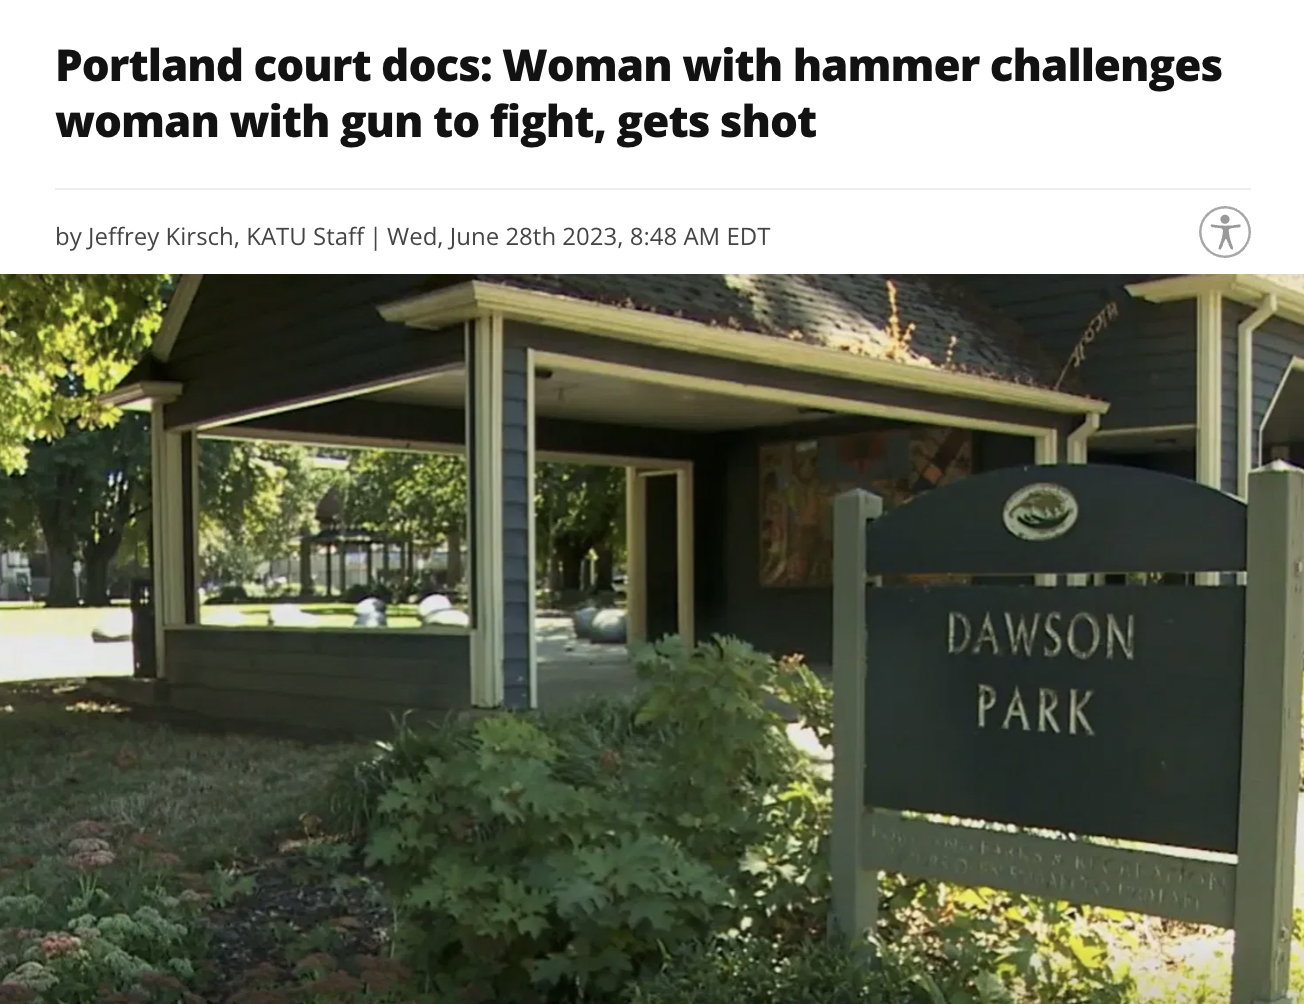 real estate - Portland court docs Woman with hammer challenges woman with gun to fight, gets shot by Jeffrey Kirsch, Katu Staff | Wed, June 28th 2023, Edt Dawson Park